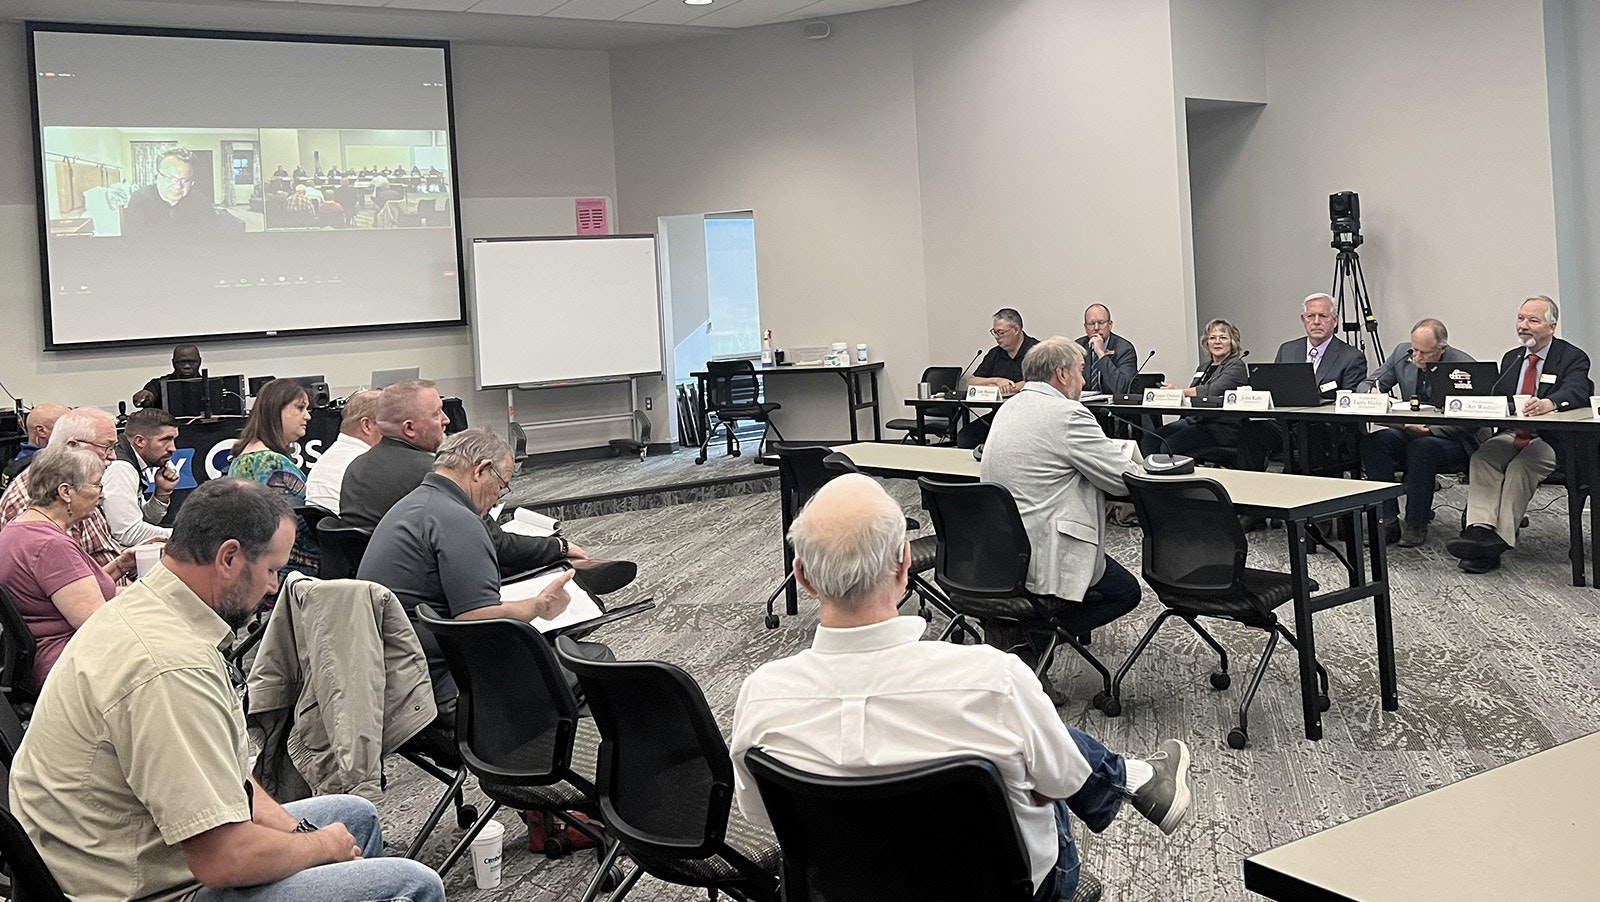 Members of the Wyoming Shooting Complex Task Force met in Riverton on Wednesday to discuss the proposed complex and hear public comments.